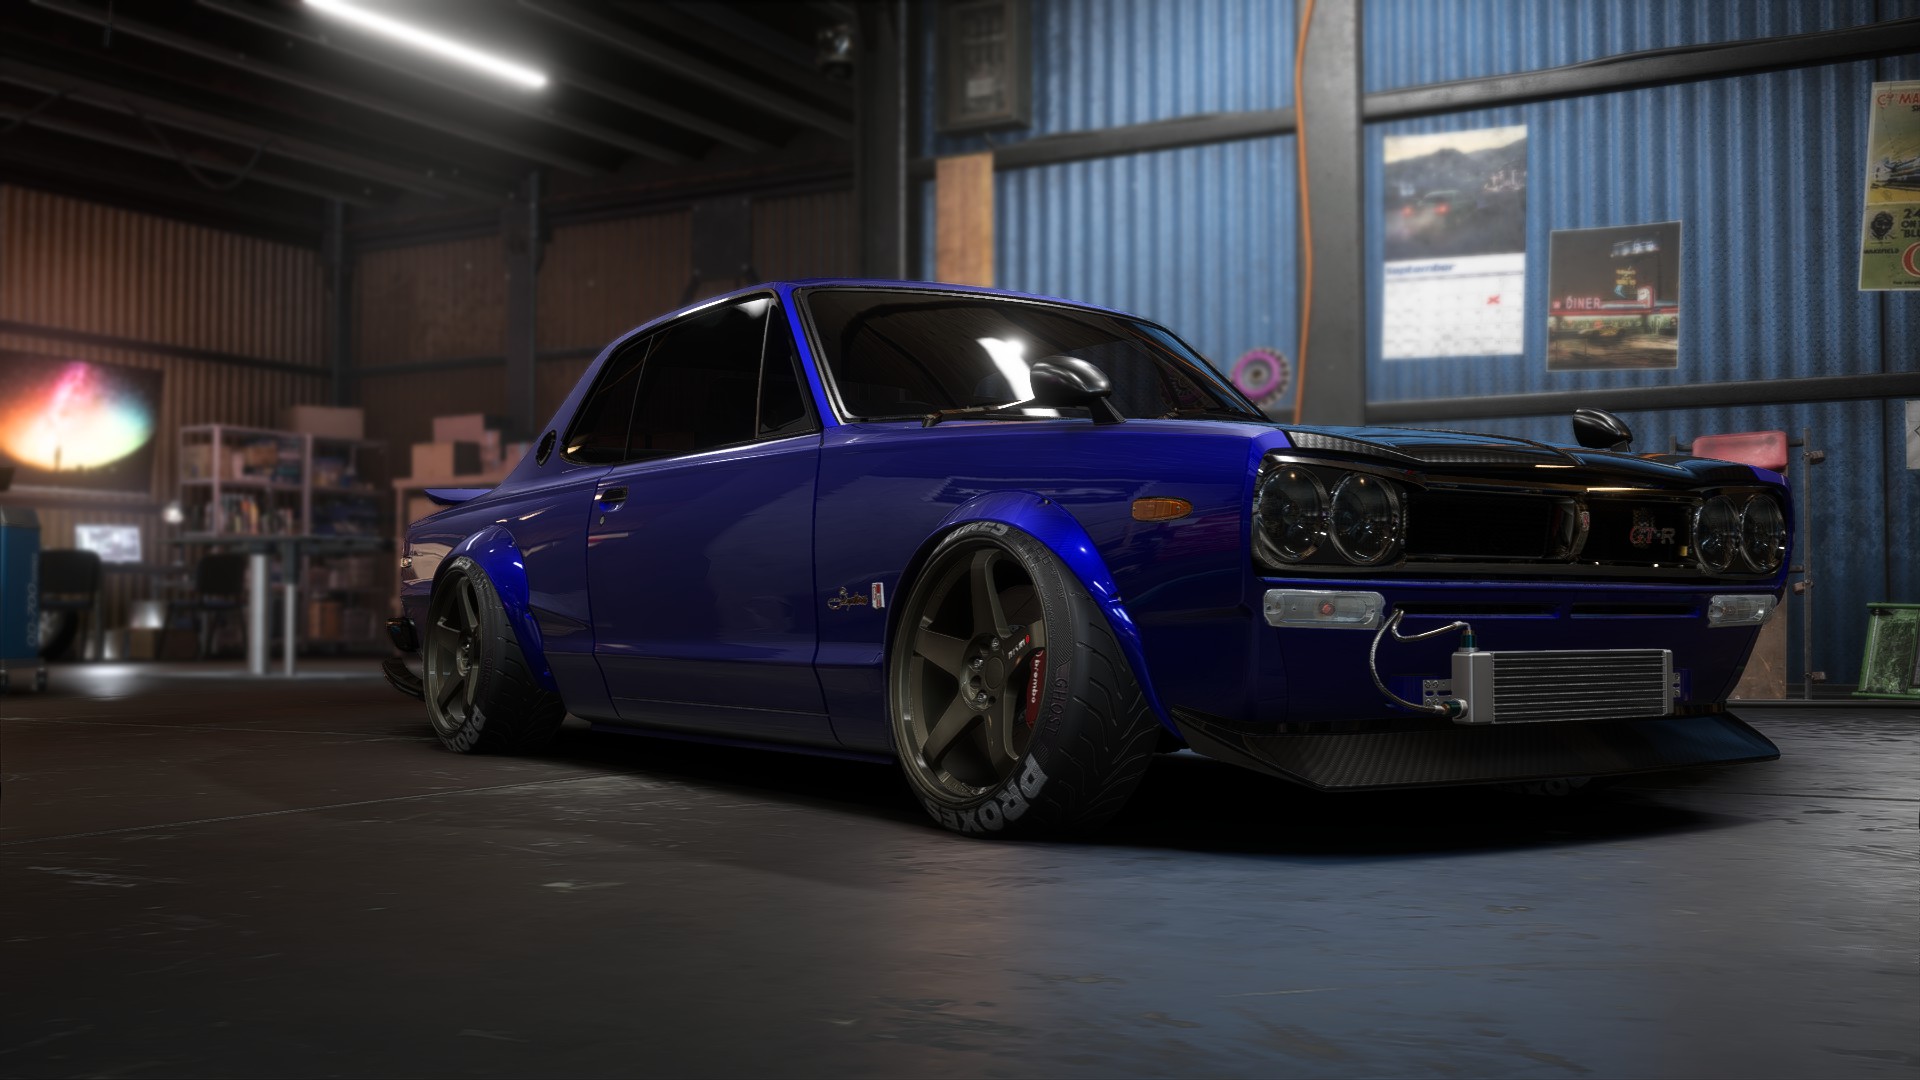 General 1920x1080 Nissan Skyline Nissan Need for Speed Need for Speed Payback Nissan Skyline C10 car video games